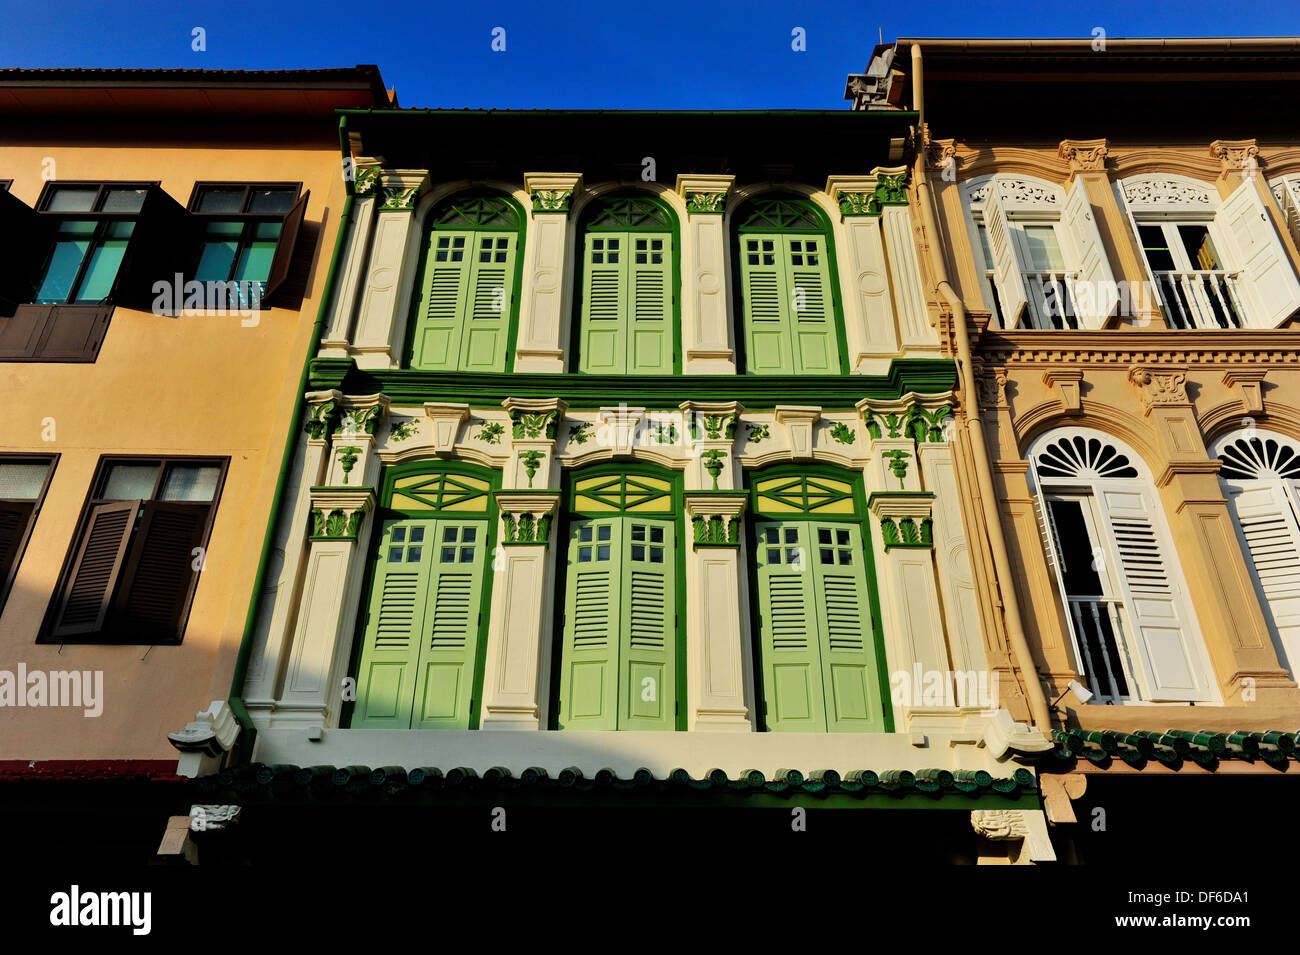 Rows of conserved shophouses in Singapore Stock Photo